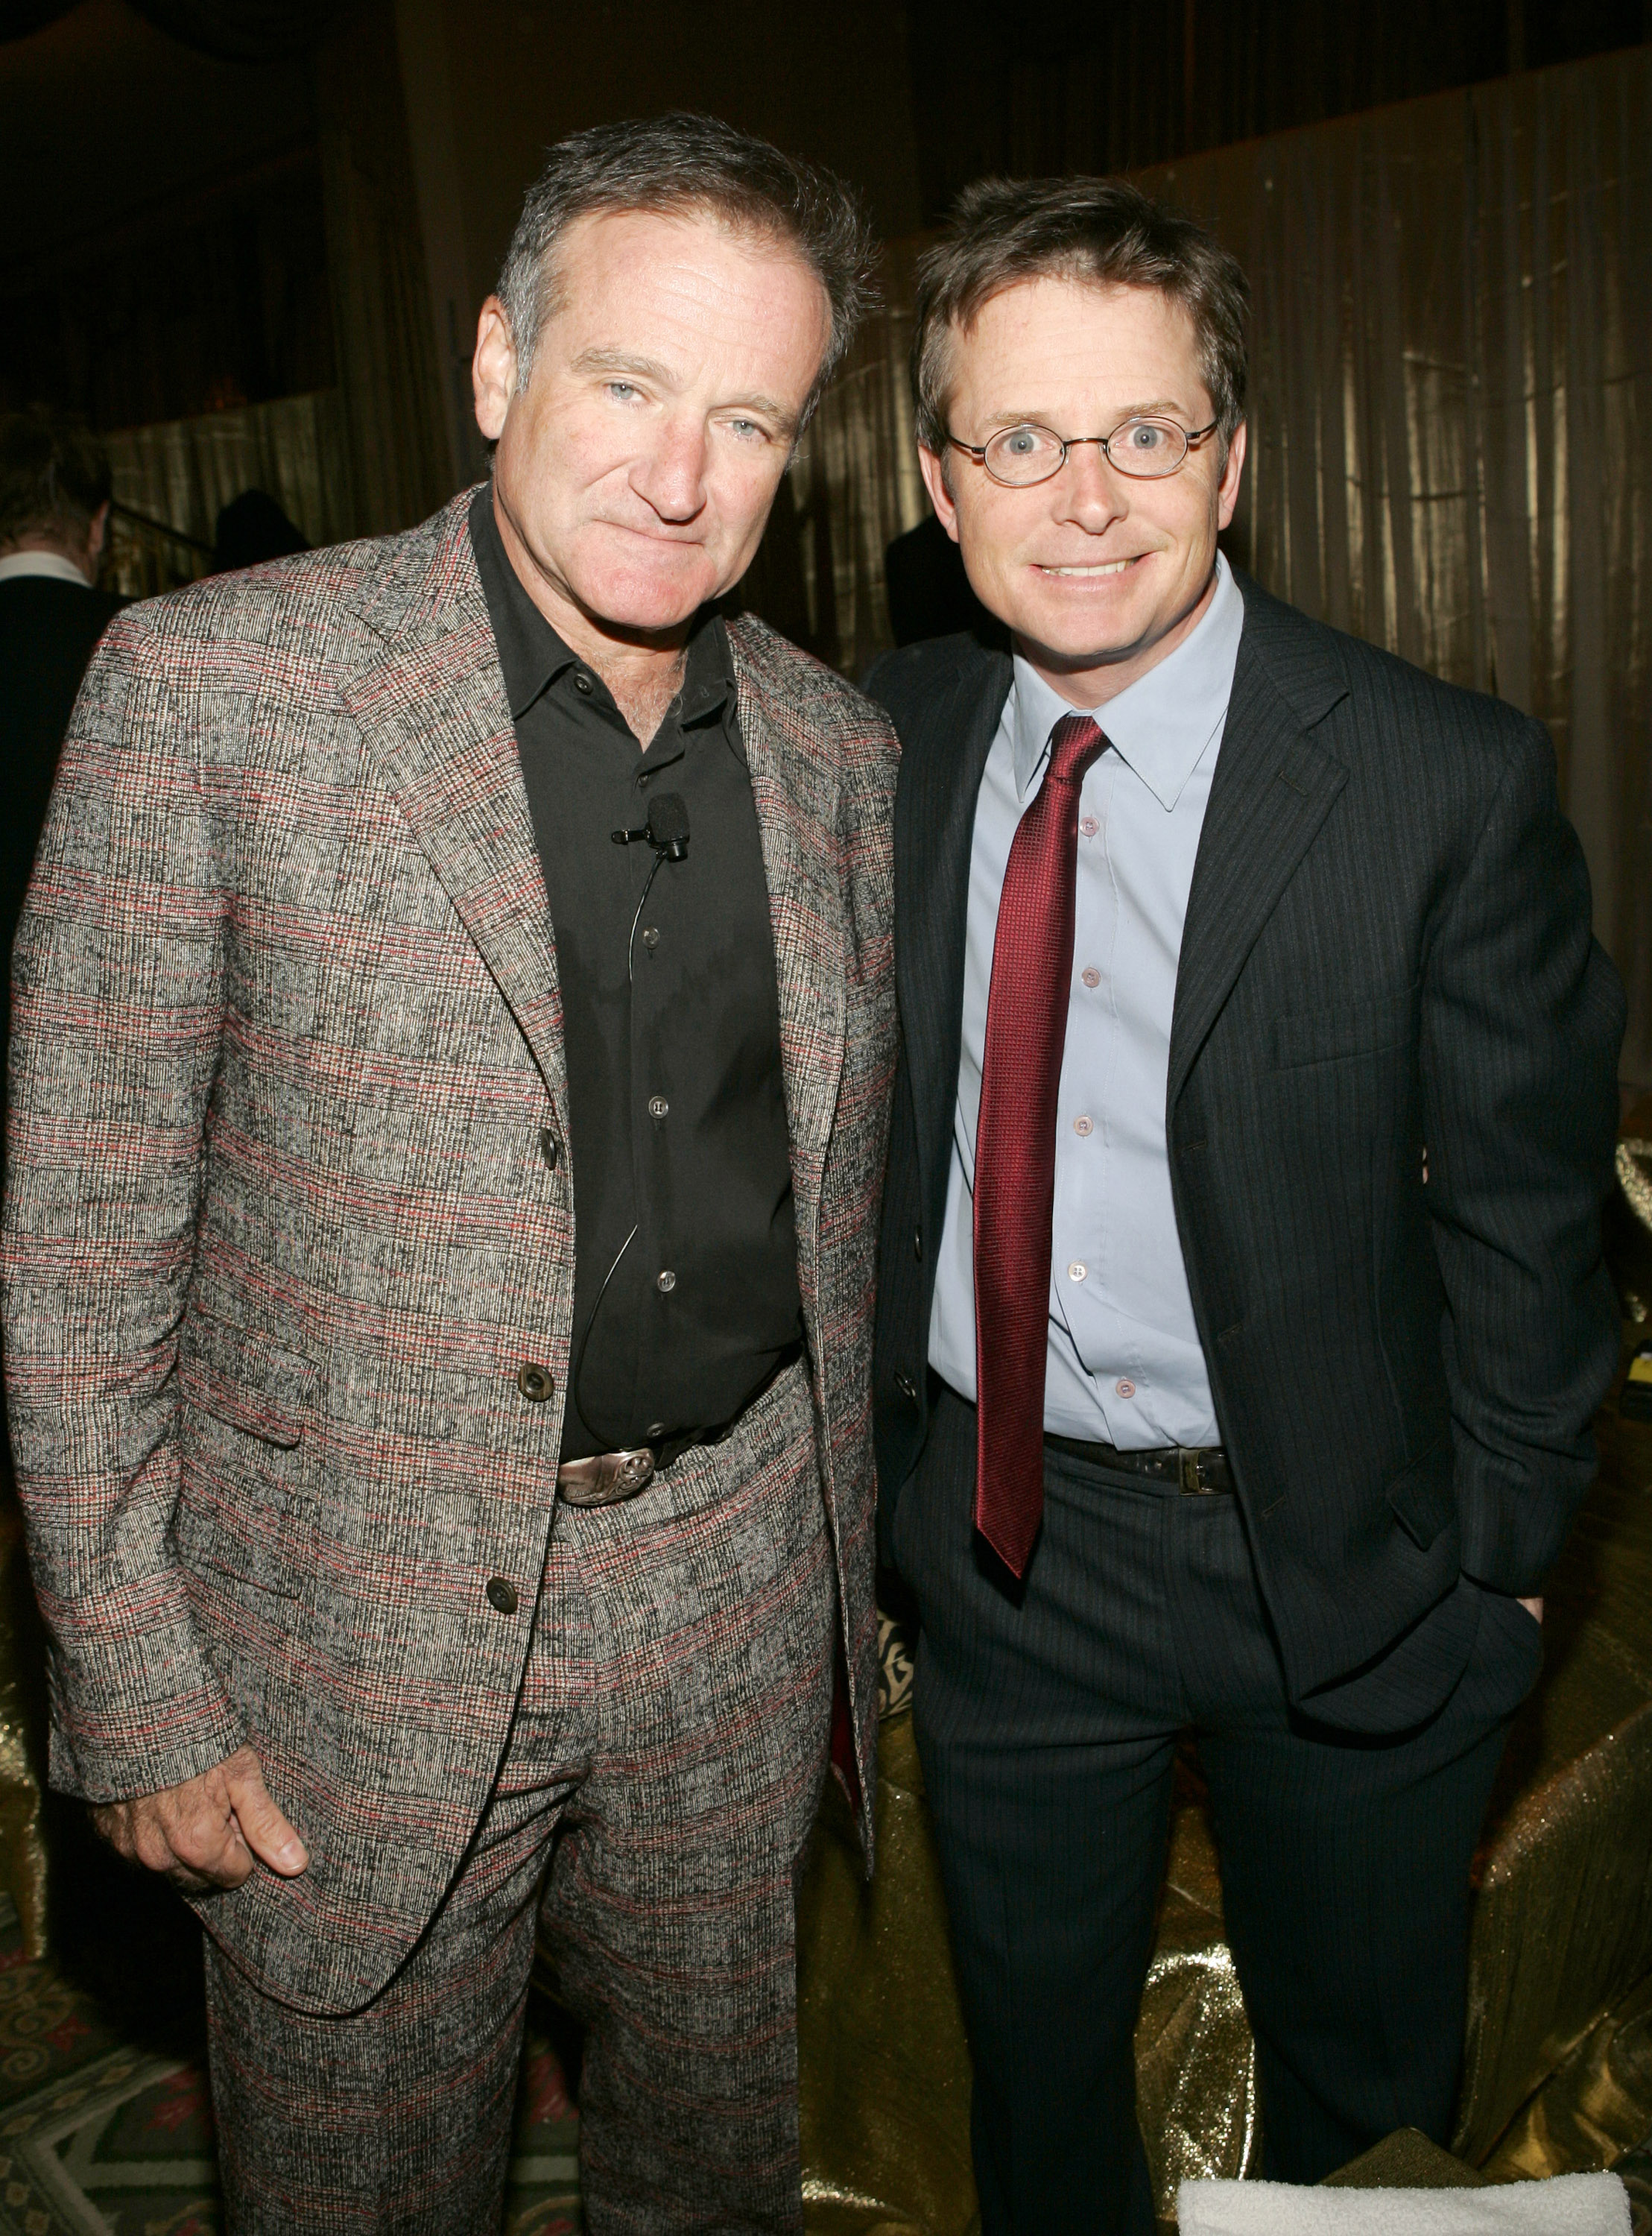 Robin Williams and Michael J. Fox during "A Funny Thing Happened on the Way to Cure Parkinson's..." Benefiting the Michael J. Fox Foundation for Parkinson's Research 2004 at The Waldorf Astoria in New York City. 